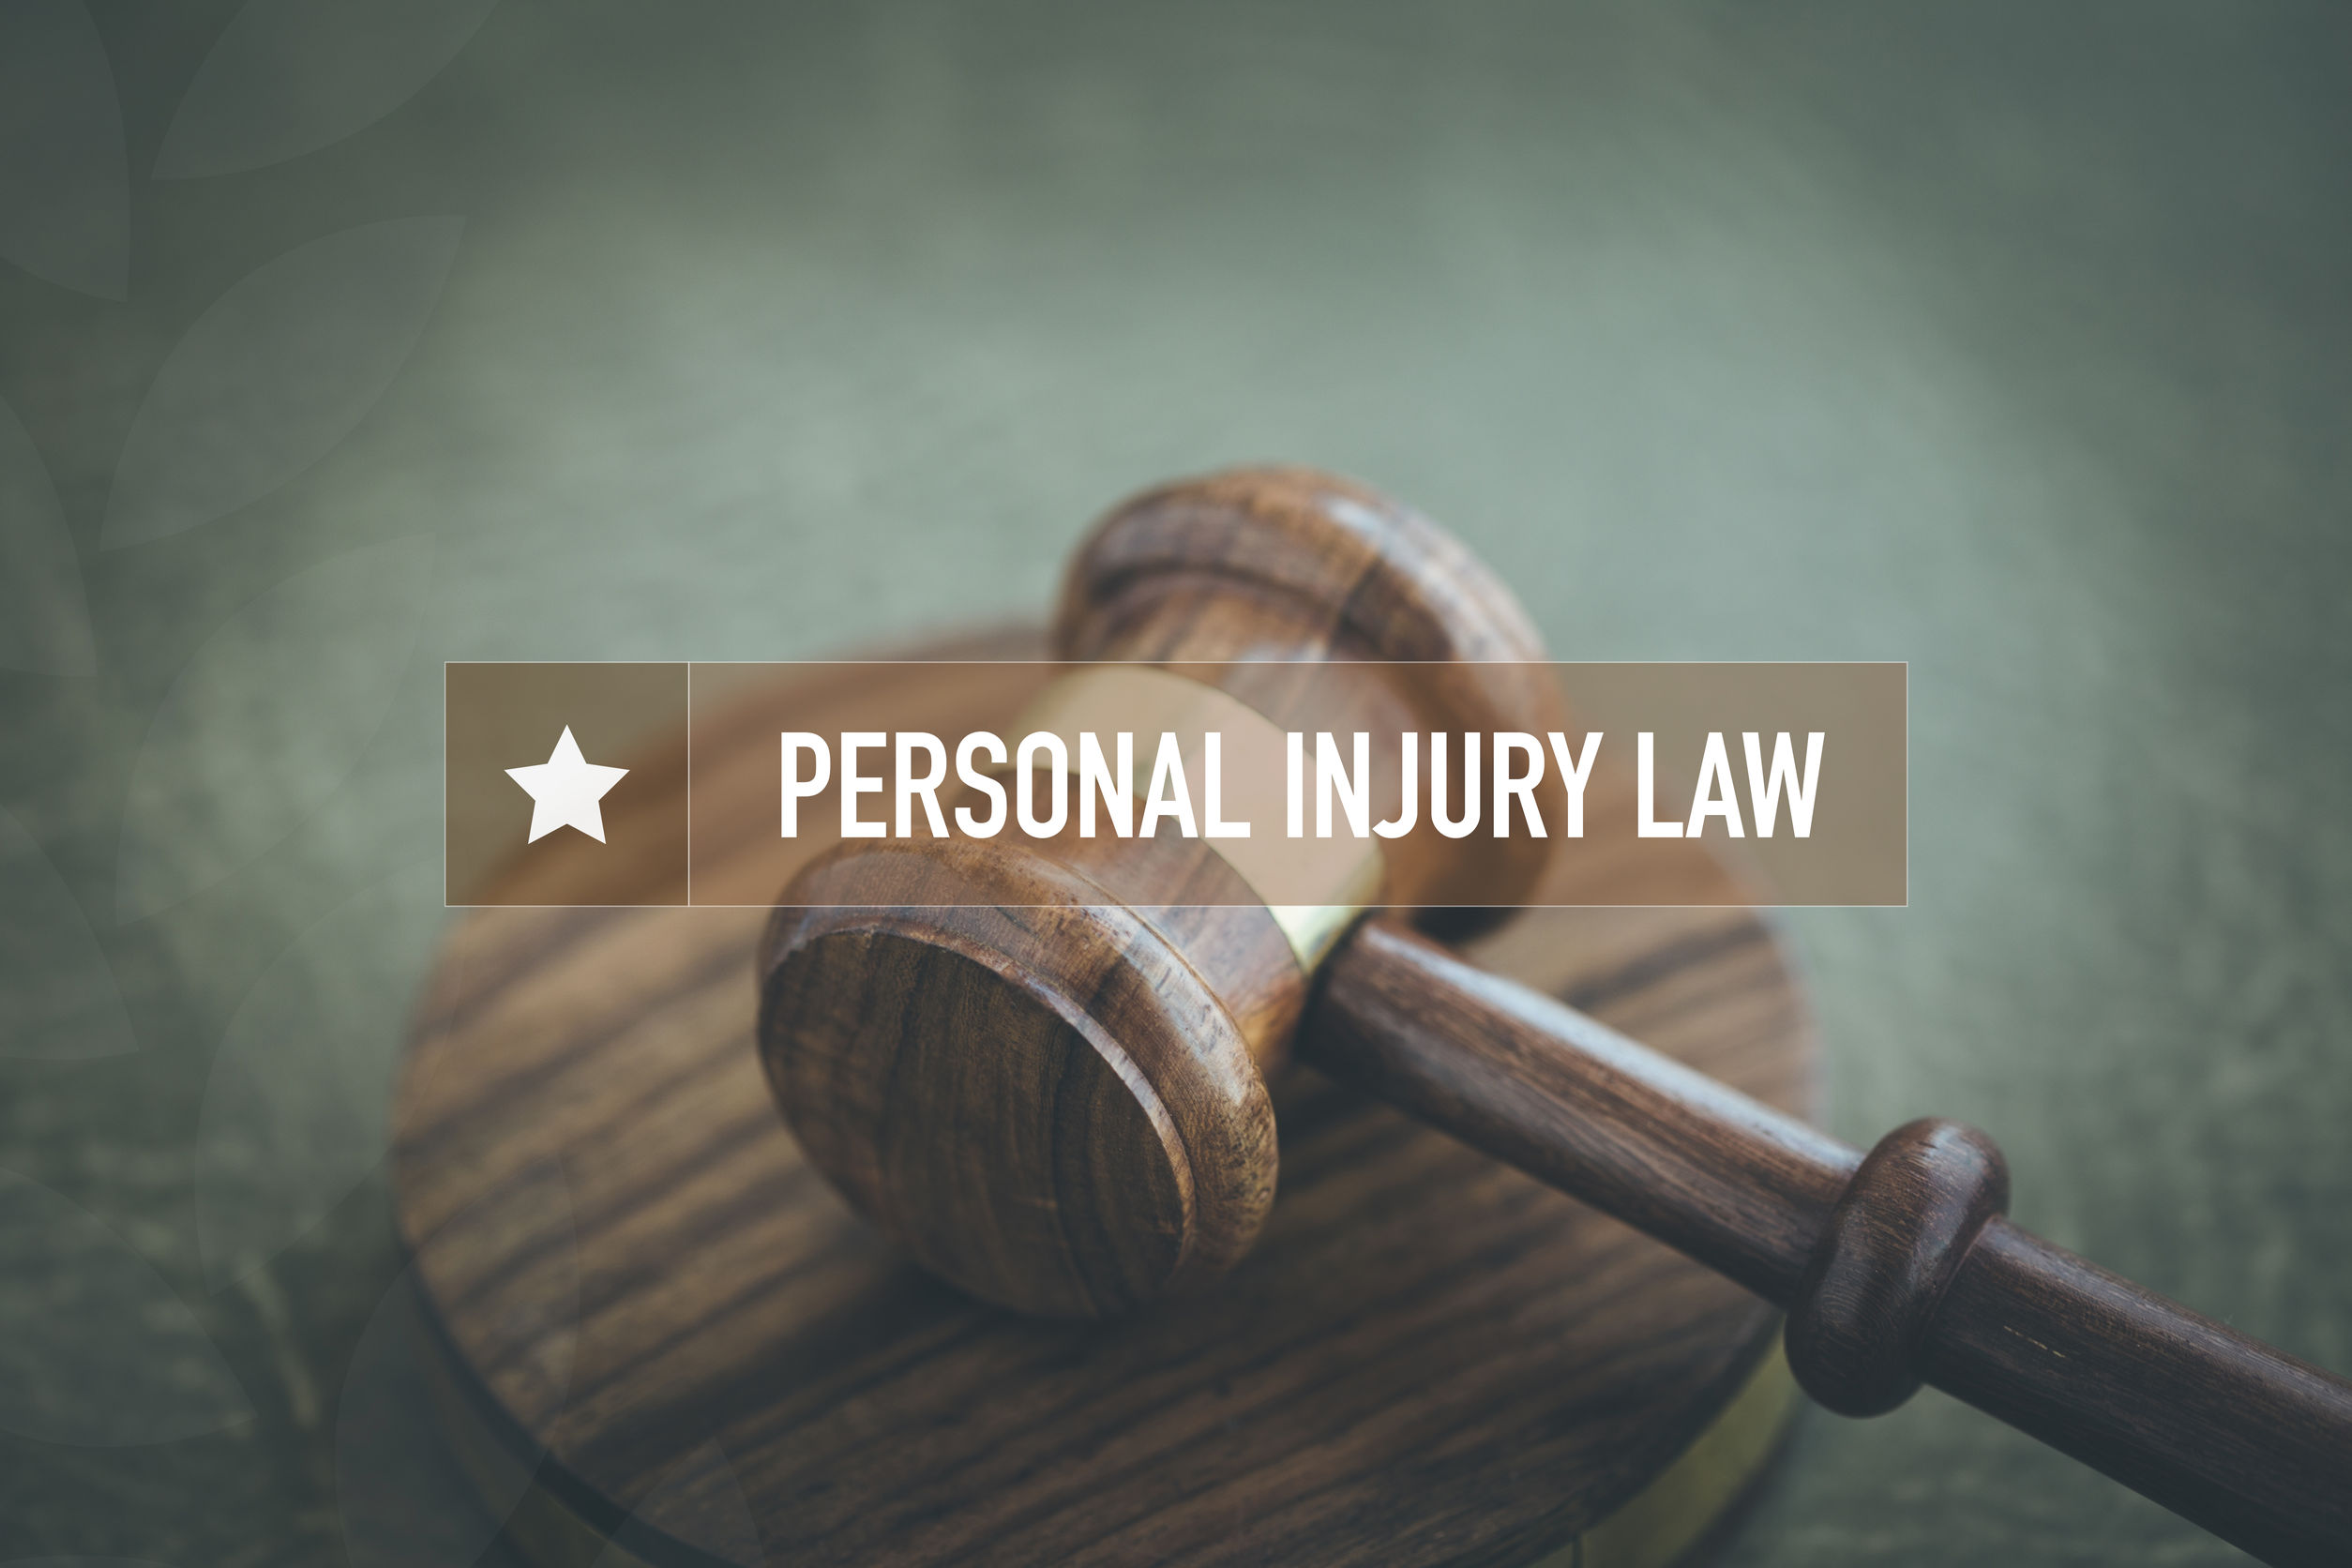 Enlist the Help of a Skilled Personal Injury Attorney in Stevens Point, WI